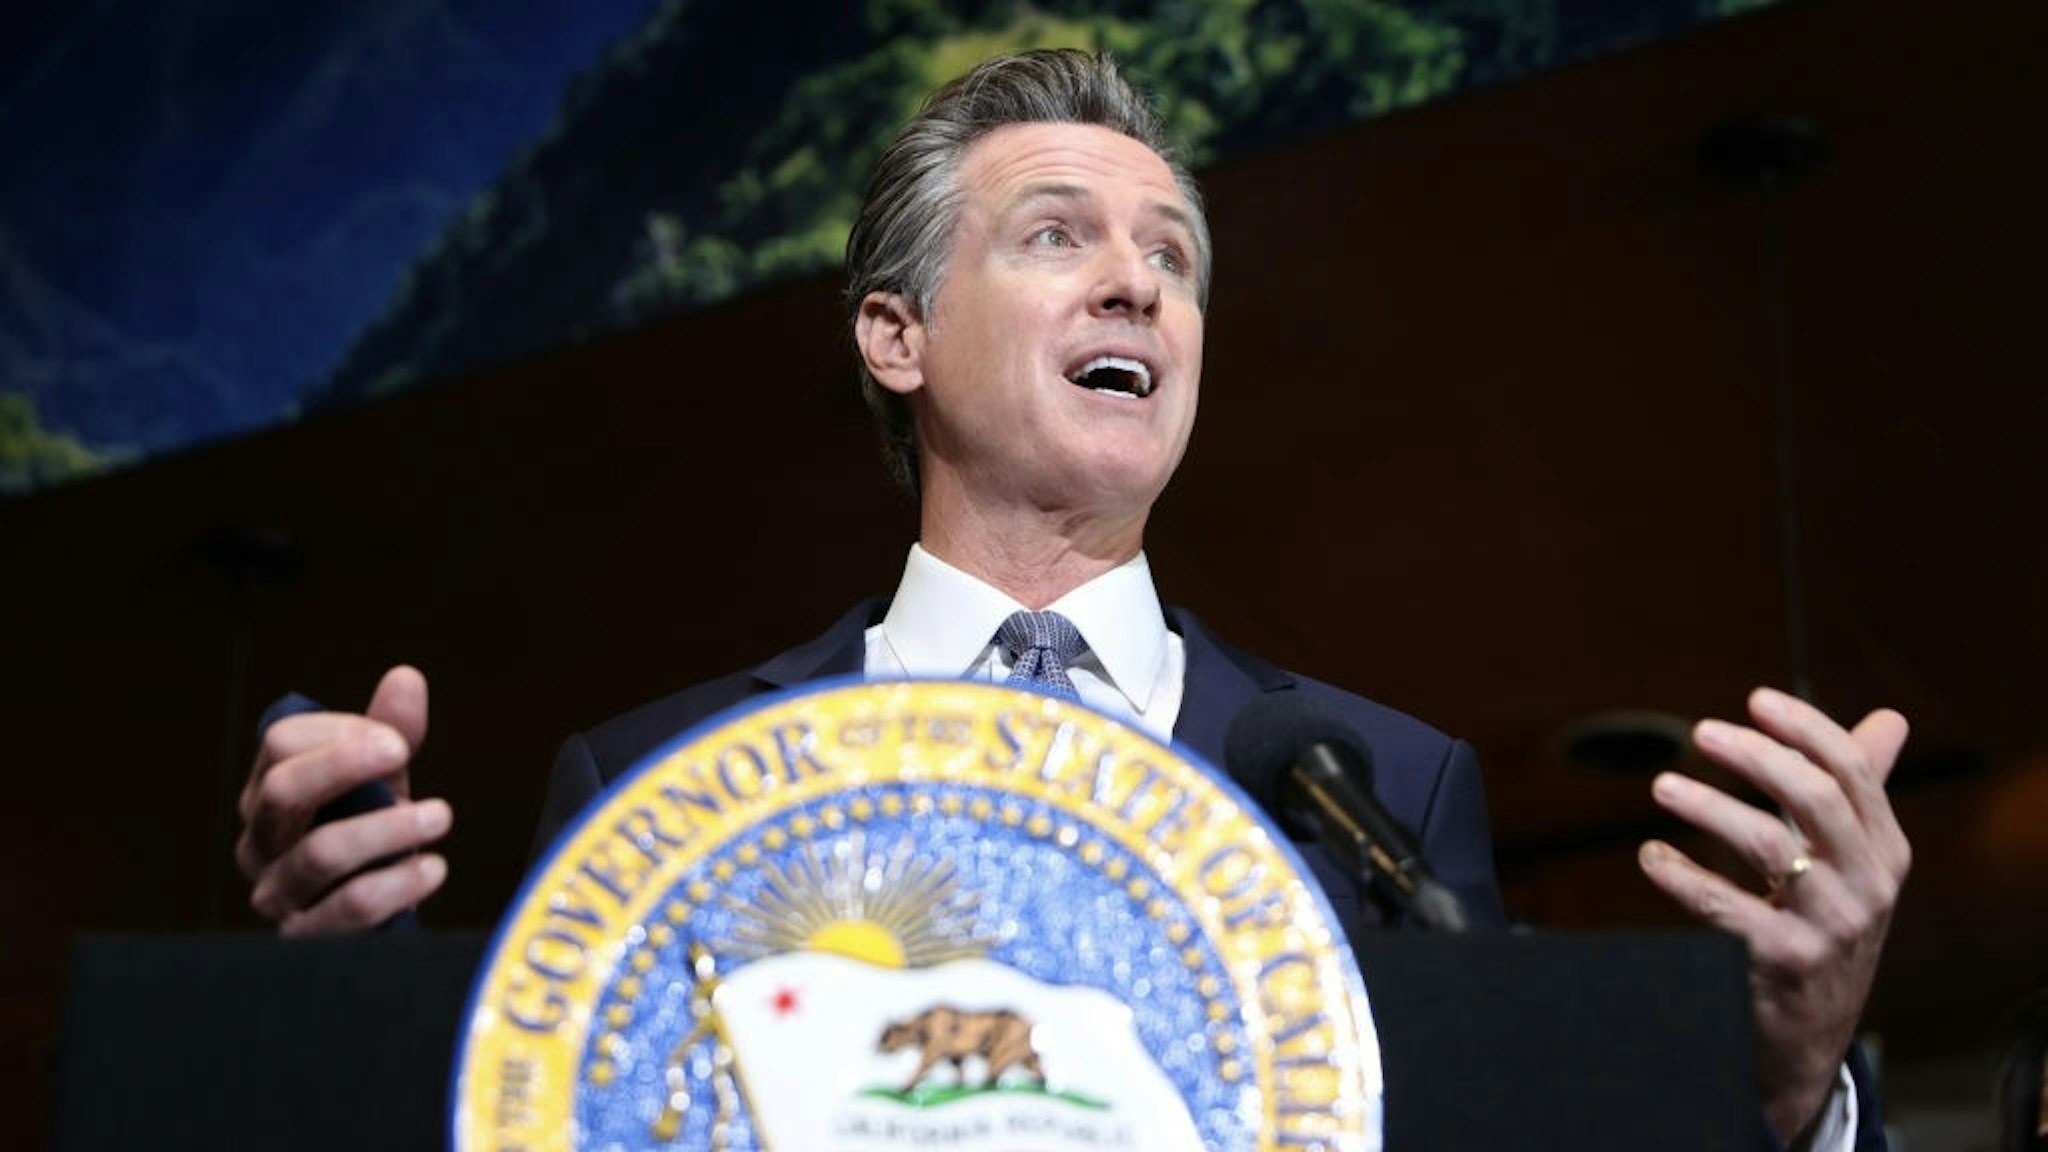 Governor Newsom Signs Covid-19 Recovery Package OAKLAND, CALIFORNIA - OCTOBER 08: California Gov. Gavin Newsom speaks during a news conference at Kingston 11 Cuisine on October 08, 2021 in Oakland, California. California Gov. Gavin Newsom signed a COVID-19 recovery package, Senate Bill 314, that will allow restaurants and bars to keep parklets and give them a one-year grace period to apply for permanent expansion. (Photo by Justin Sullivan/Getty Images) Justin Sullivan / Staff